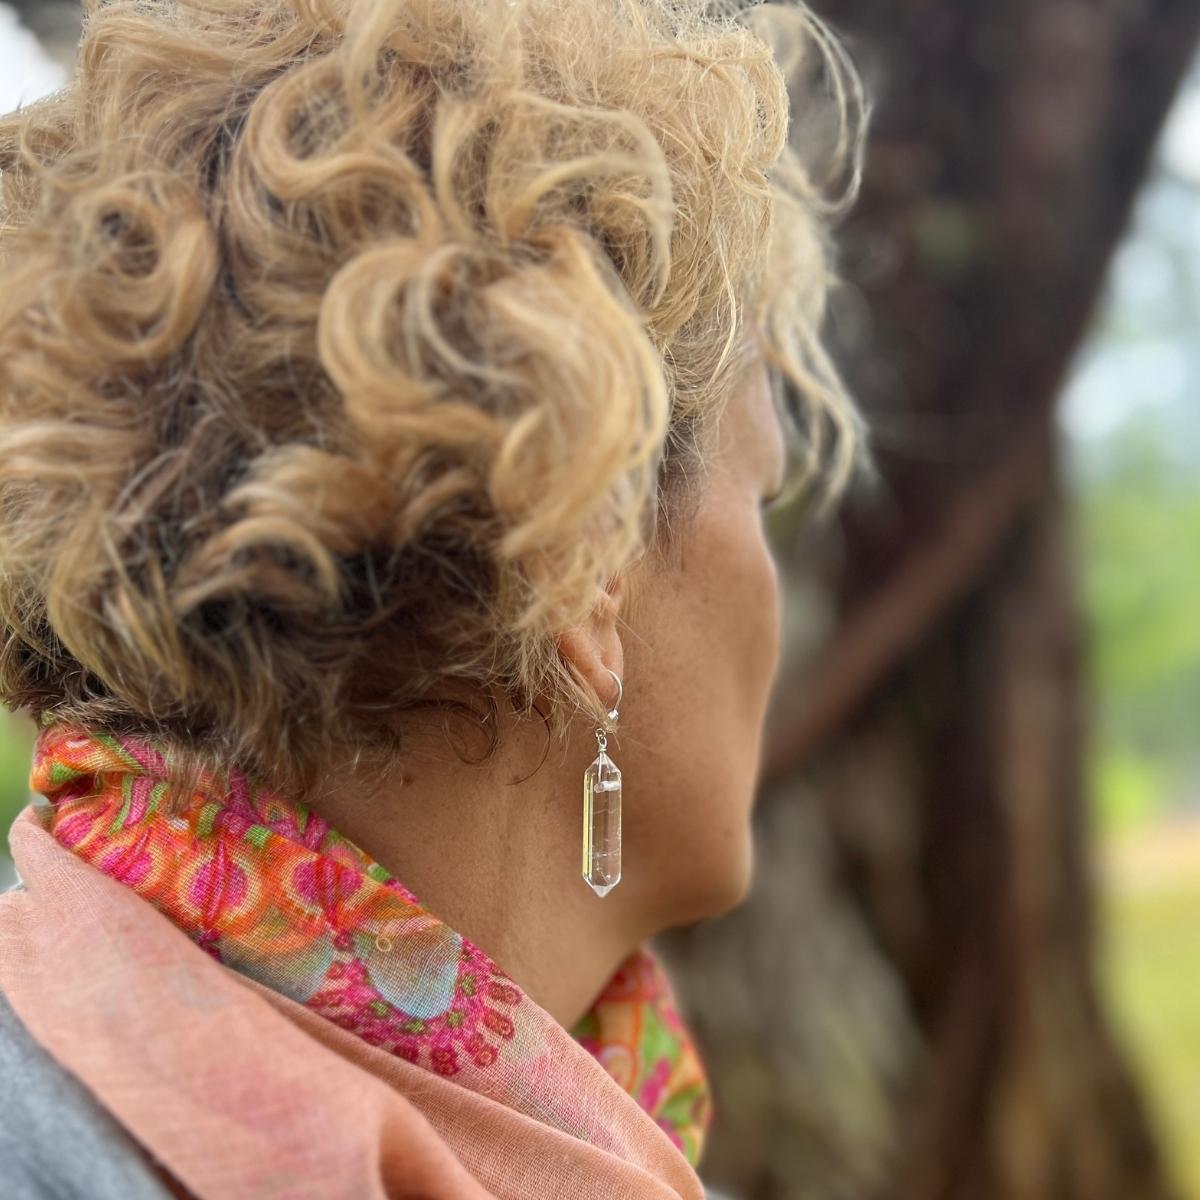 The Intuition Infusion Crystal Earrings are a perfect accessory for yogis and mindfulness-oriented individuals who seek to enhance their spiritual practices and connect with their higher selves.